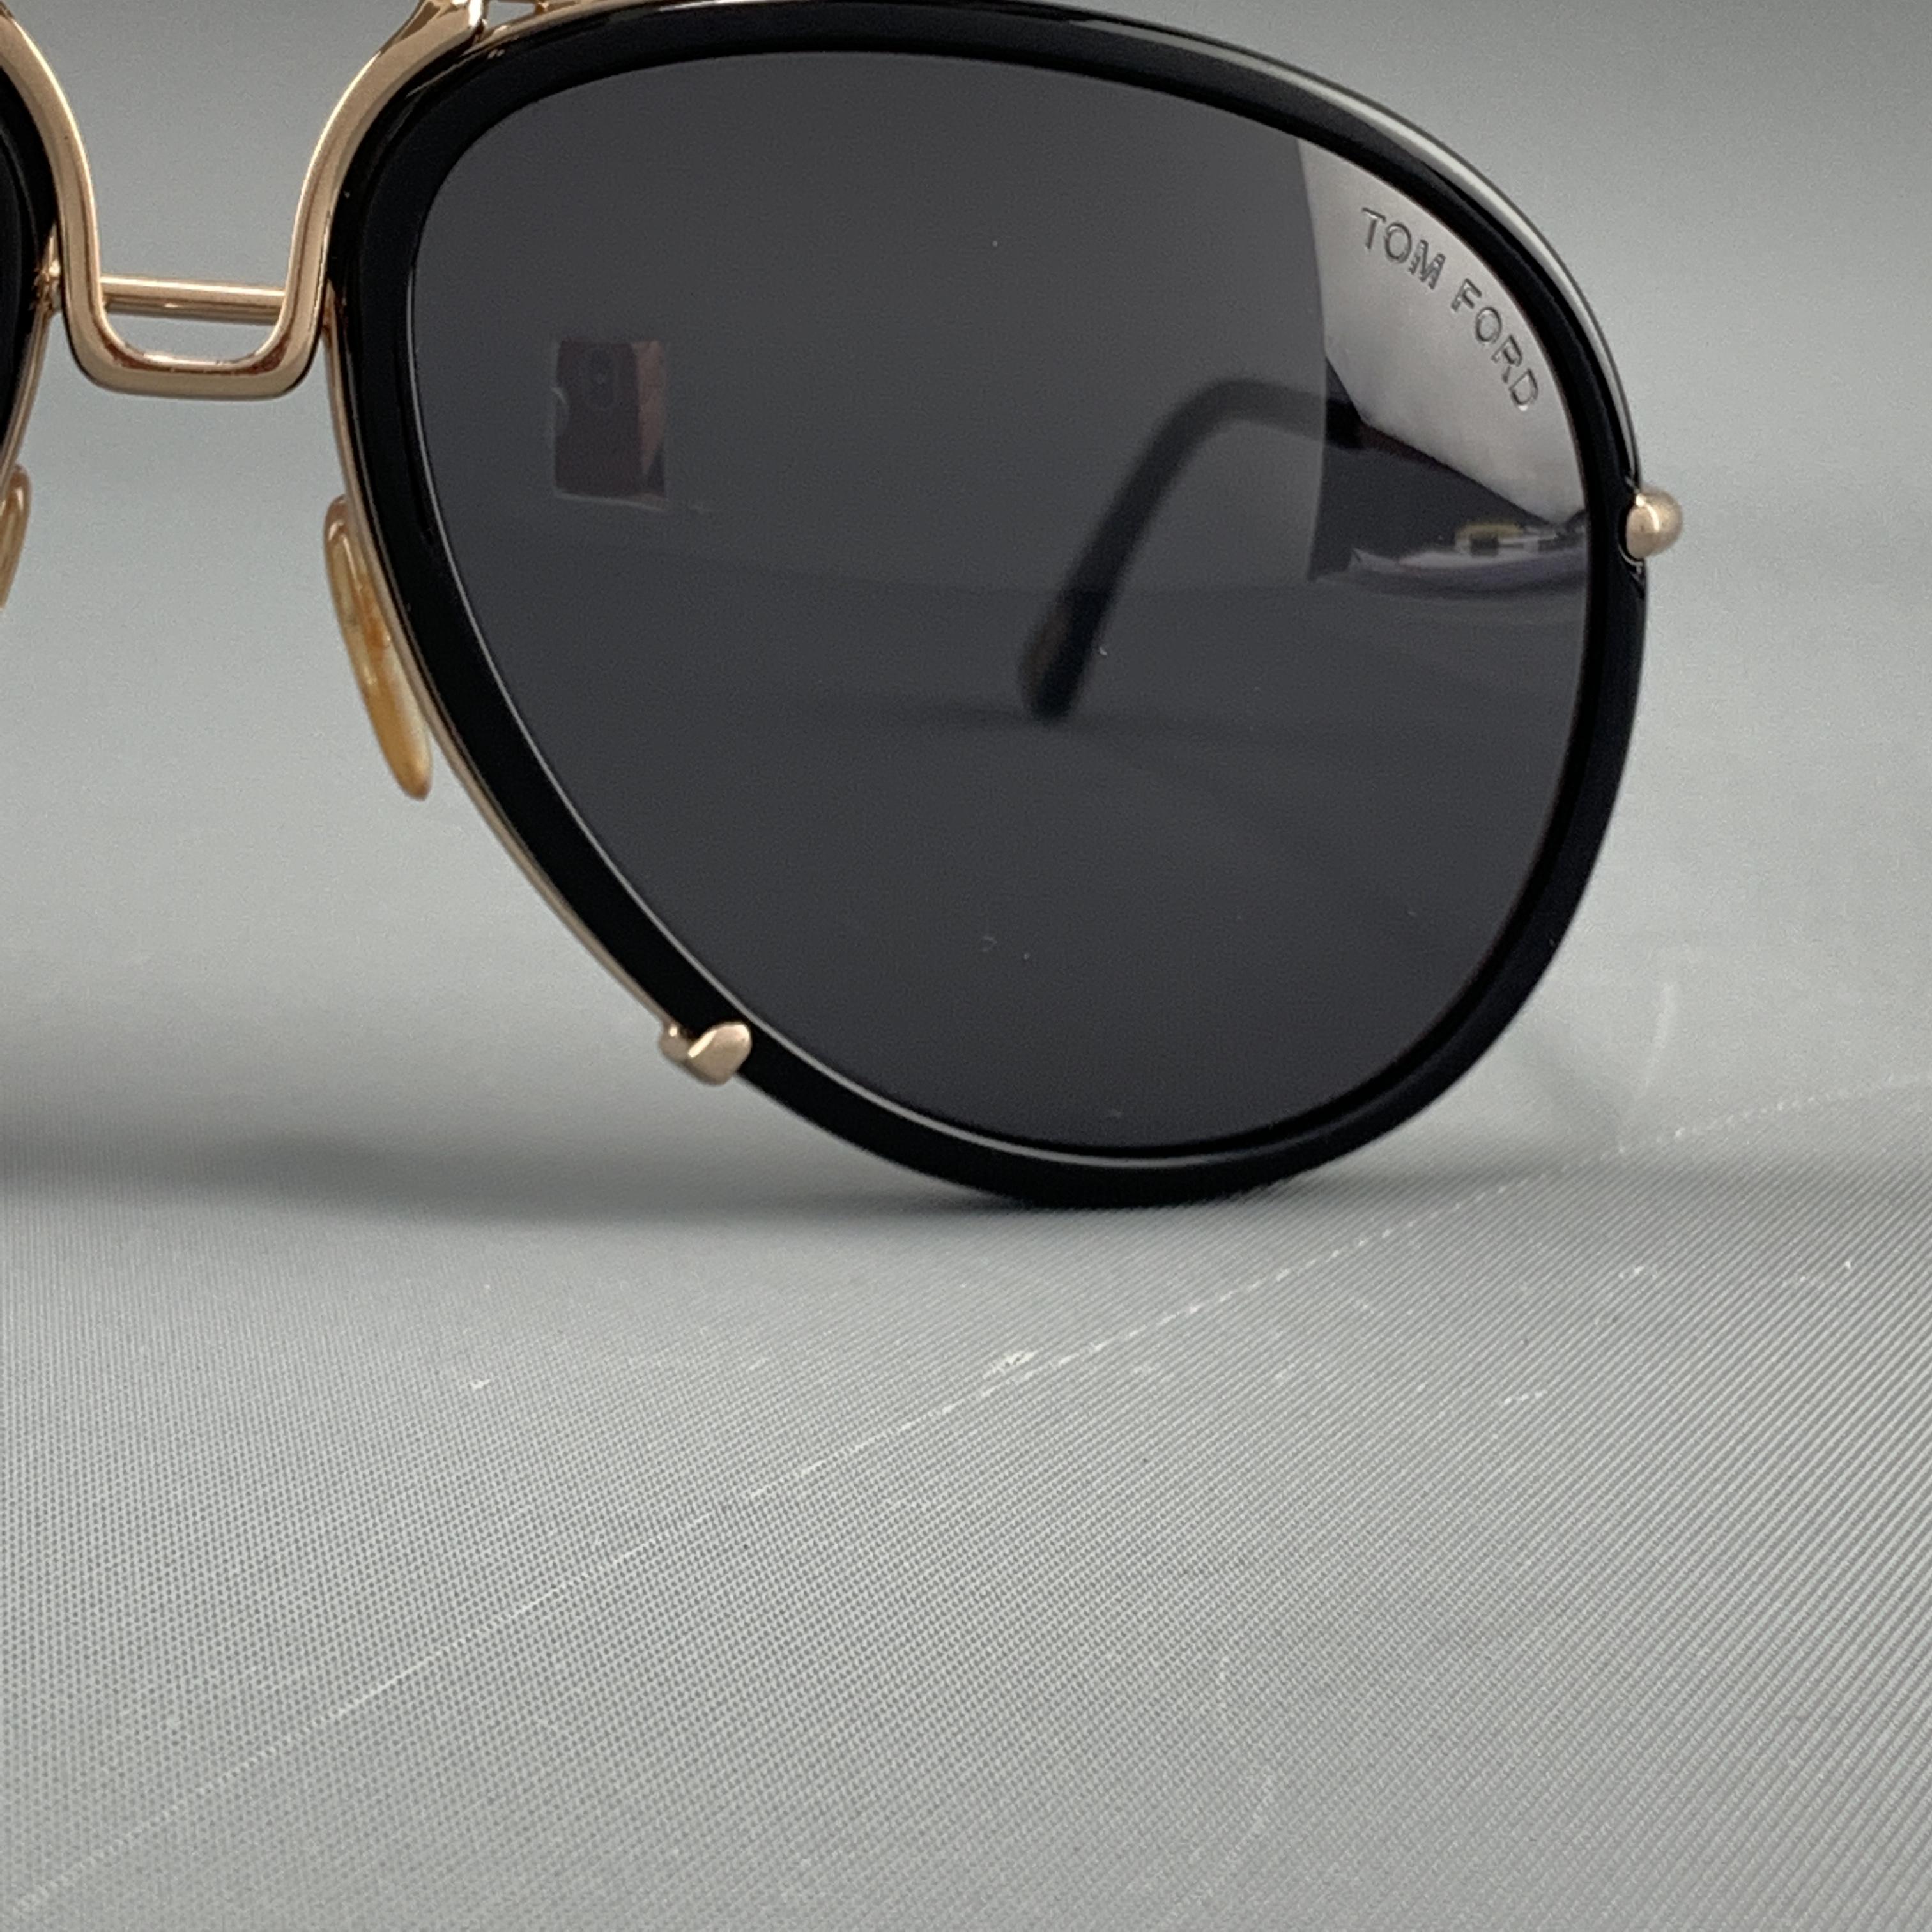 TOM FORD Hawkings sunglasses come in gold tone meta with black trimmed aviator lenses. With case and box. Made in Italy.

Excellent Pre-Owned Condition.
Marked: Hawkings TF1 772 63 16 130

Measurements:

Length: 14 cm.
Height: 5.5 cm.